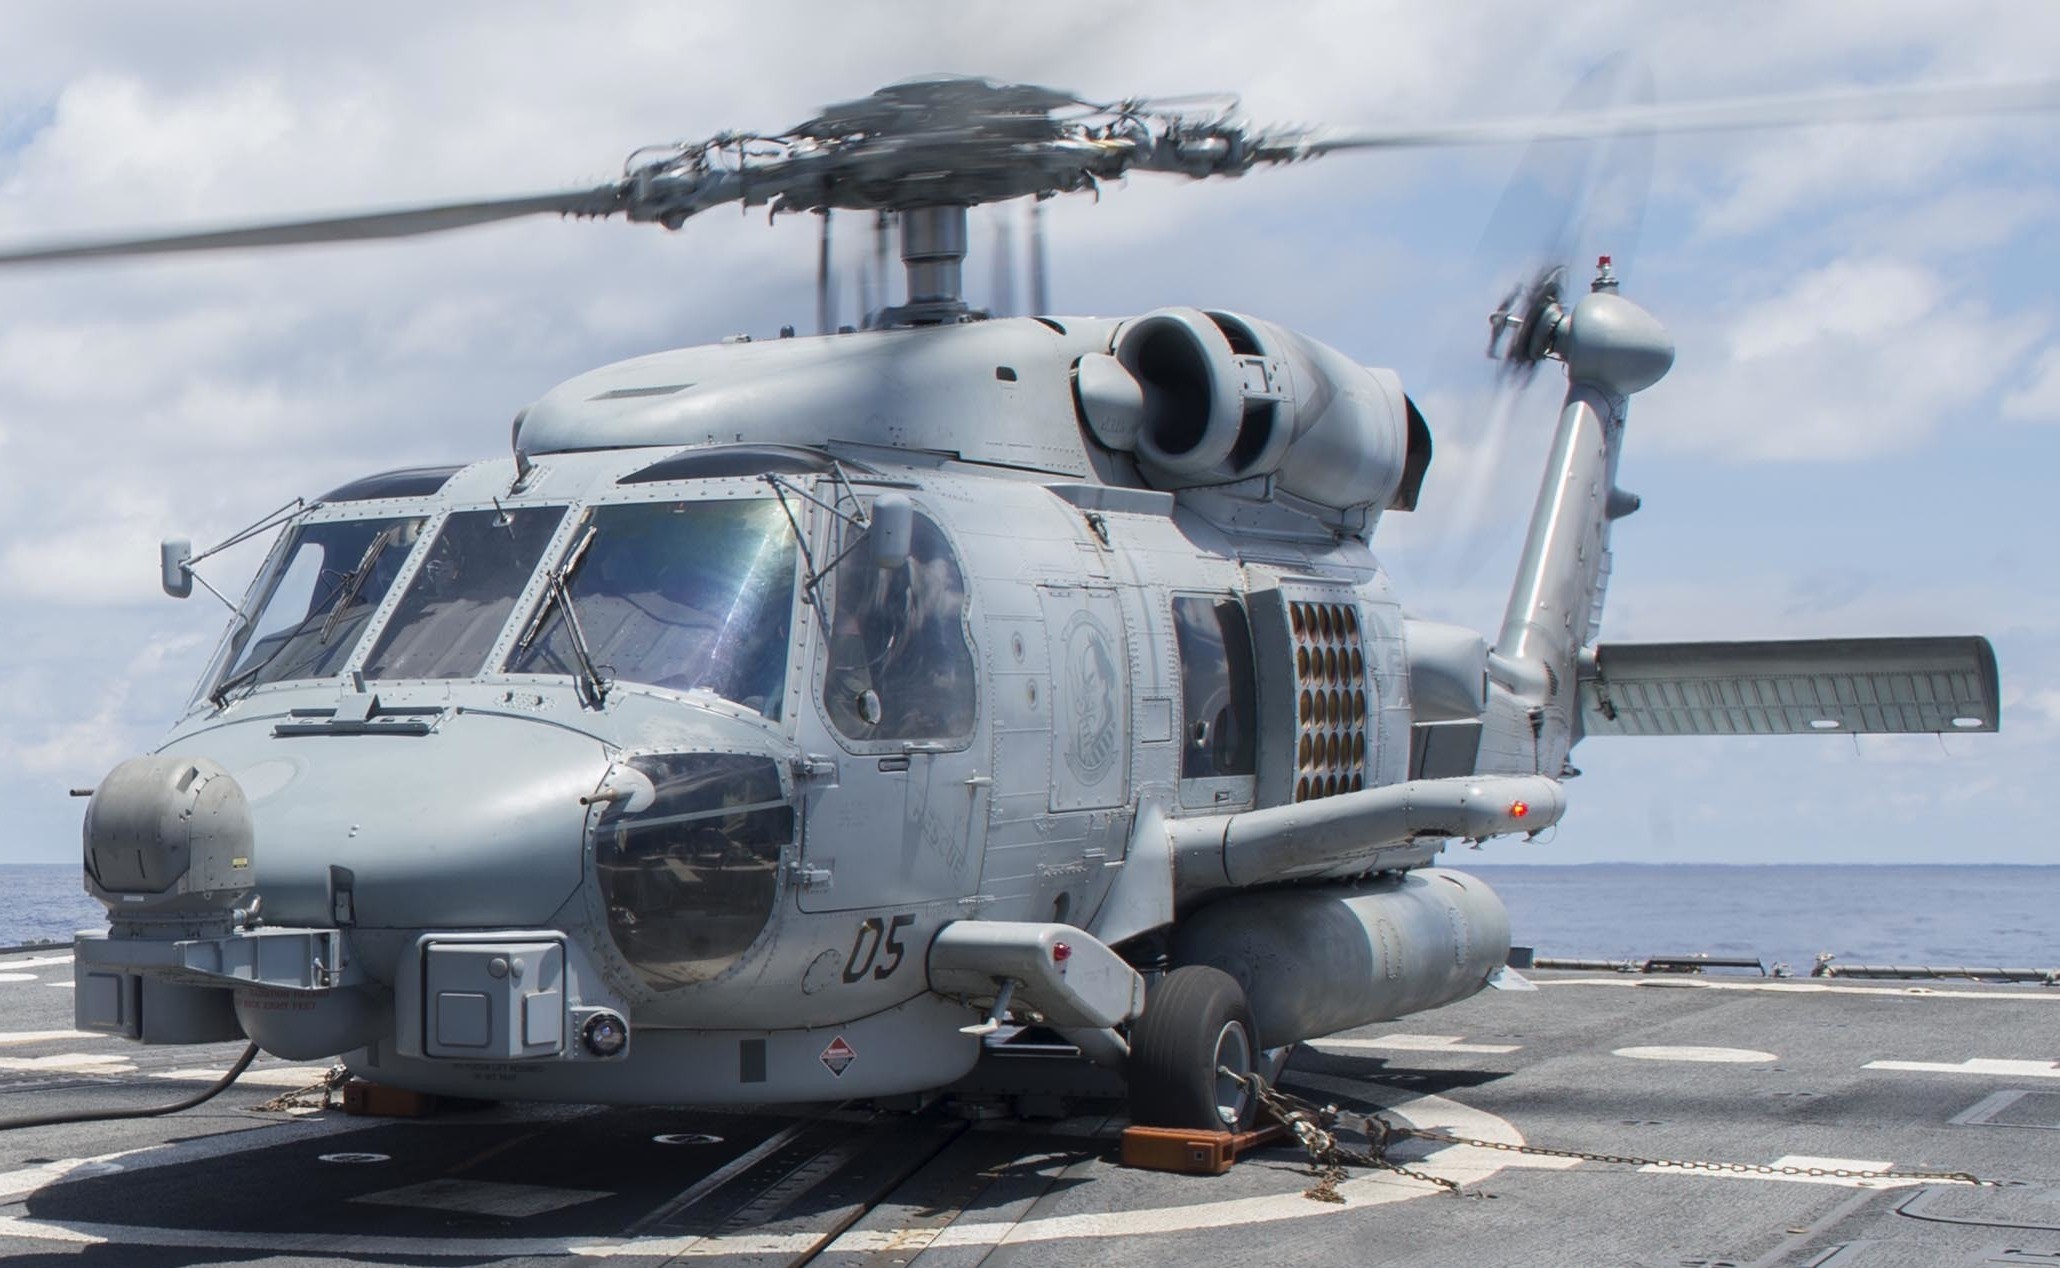 hsm-51 warlords helicopter maritime strike squadron mh-60r seahawk navy 2016 39